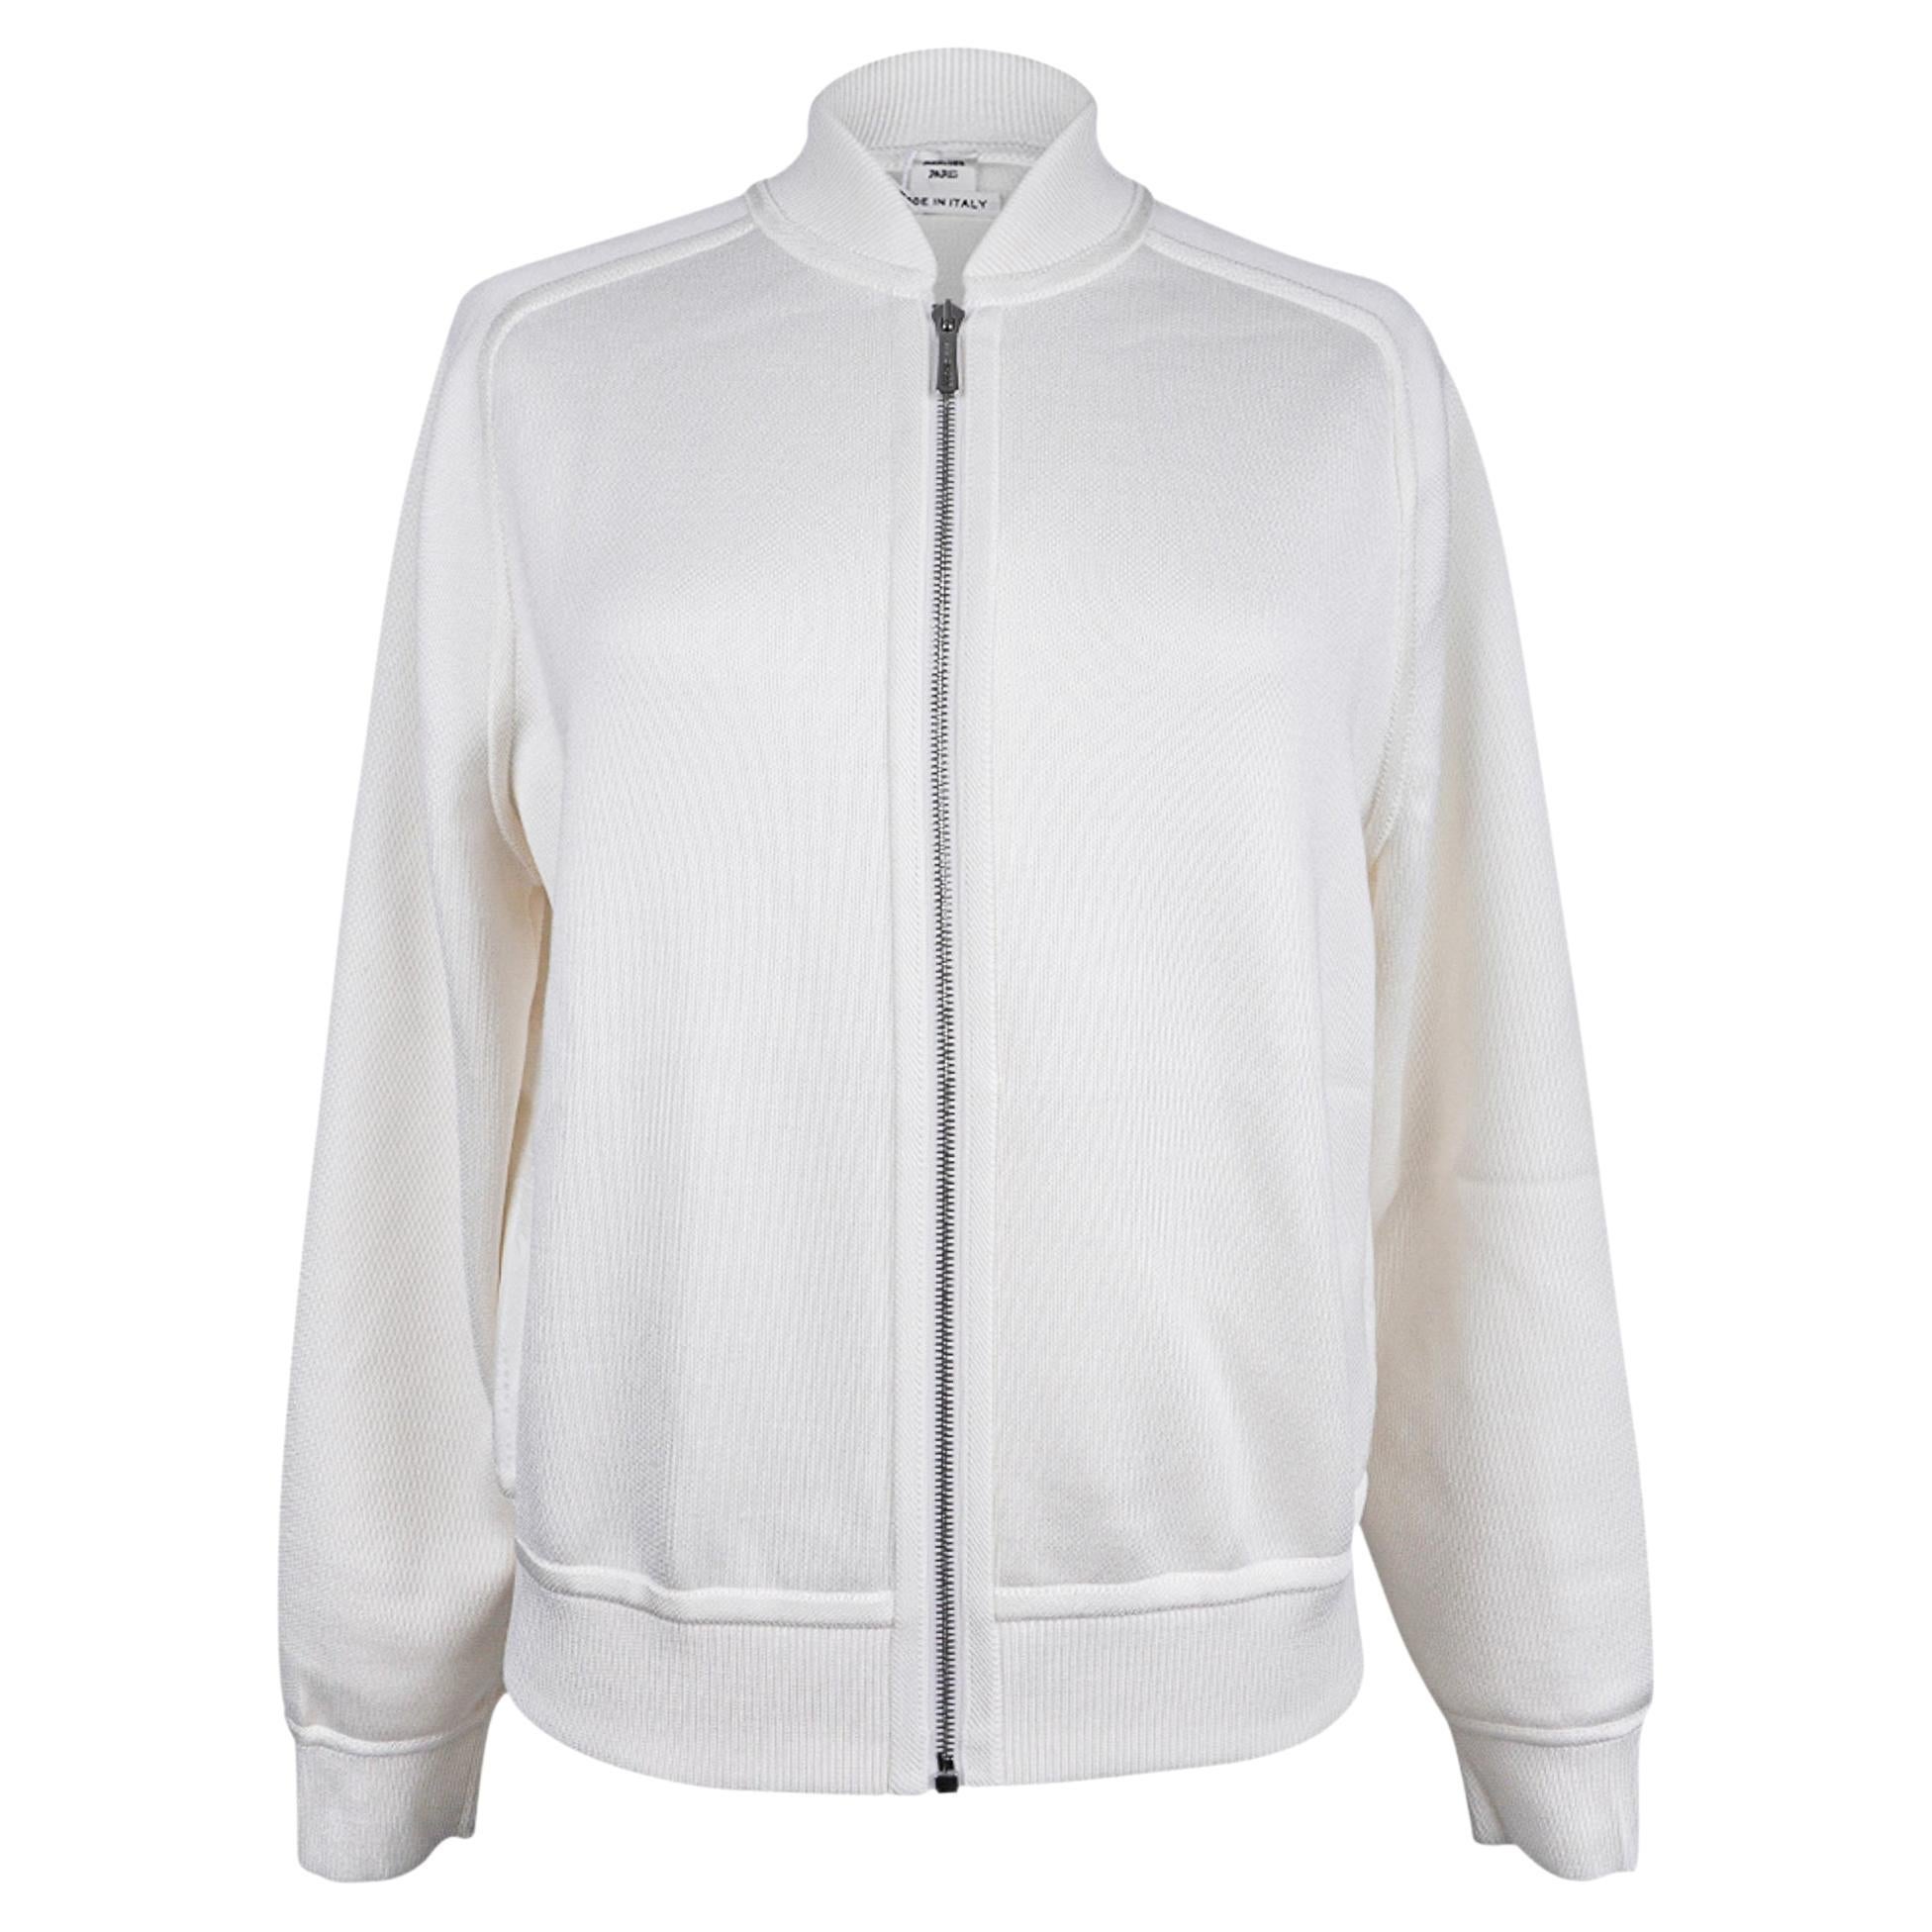 Hermes Cardigan Zip Clic Clac Winter White Jacket 38 / 6 For Sale